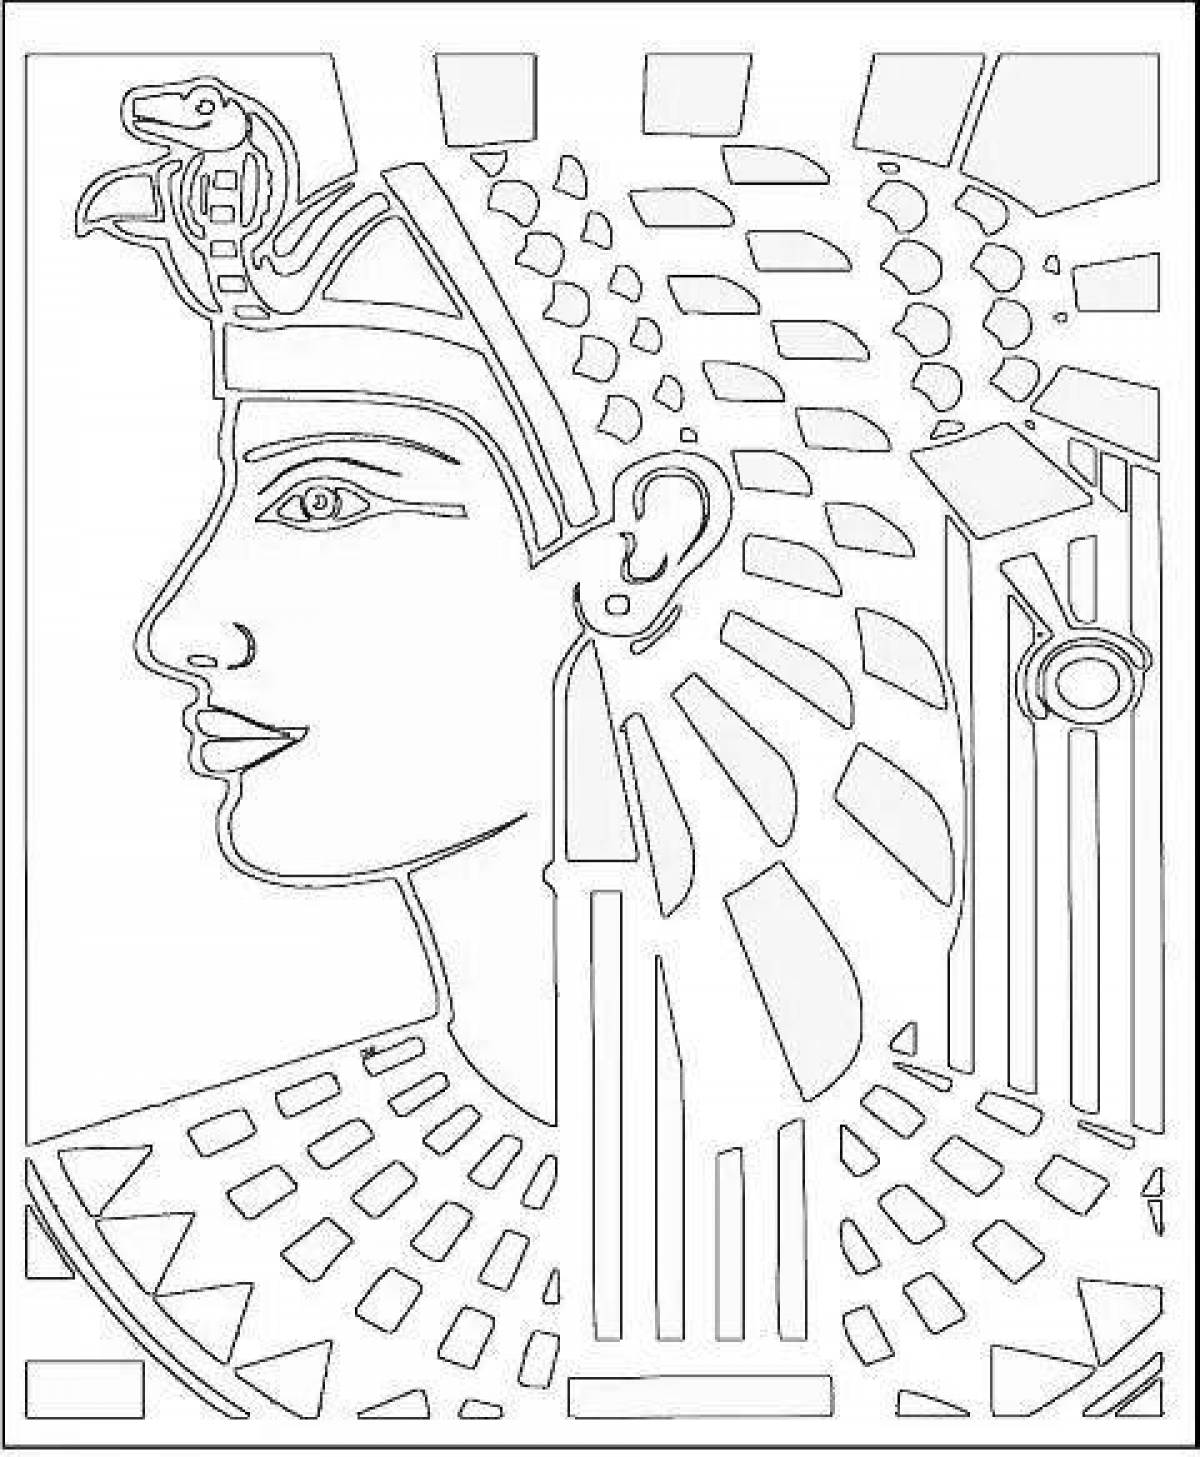 Cleopatra sublime coloring book